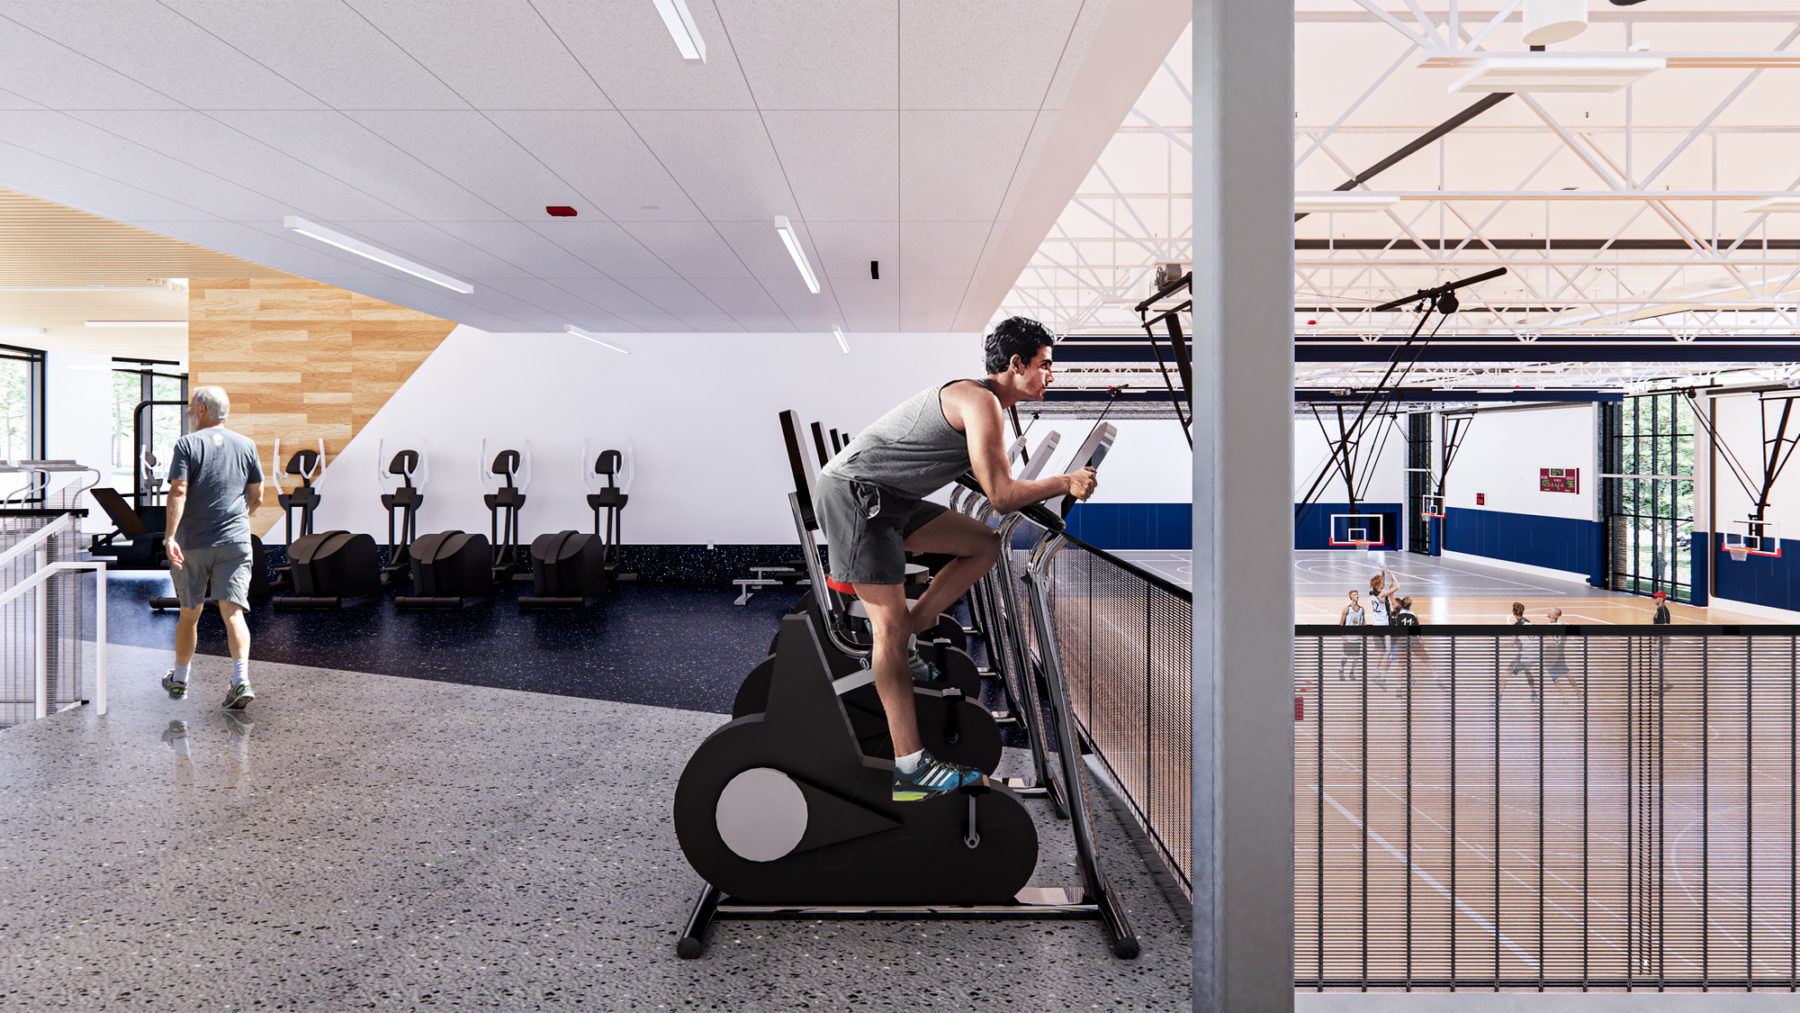 Interior rendering of fitness area. A student sits on a stationary bike overlooking the gymnasium below.